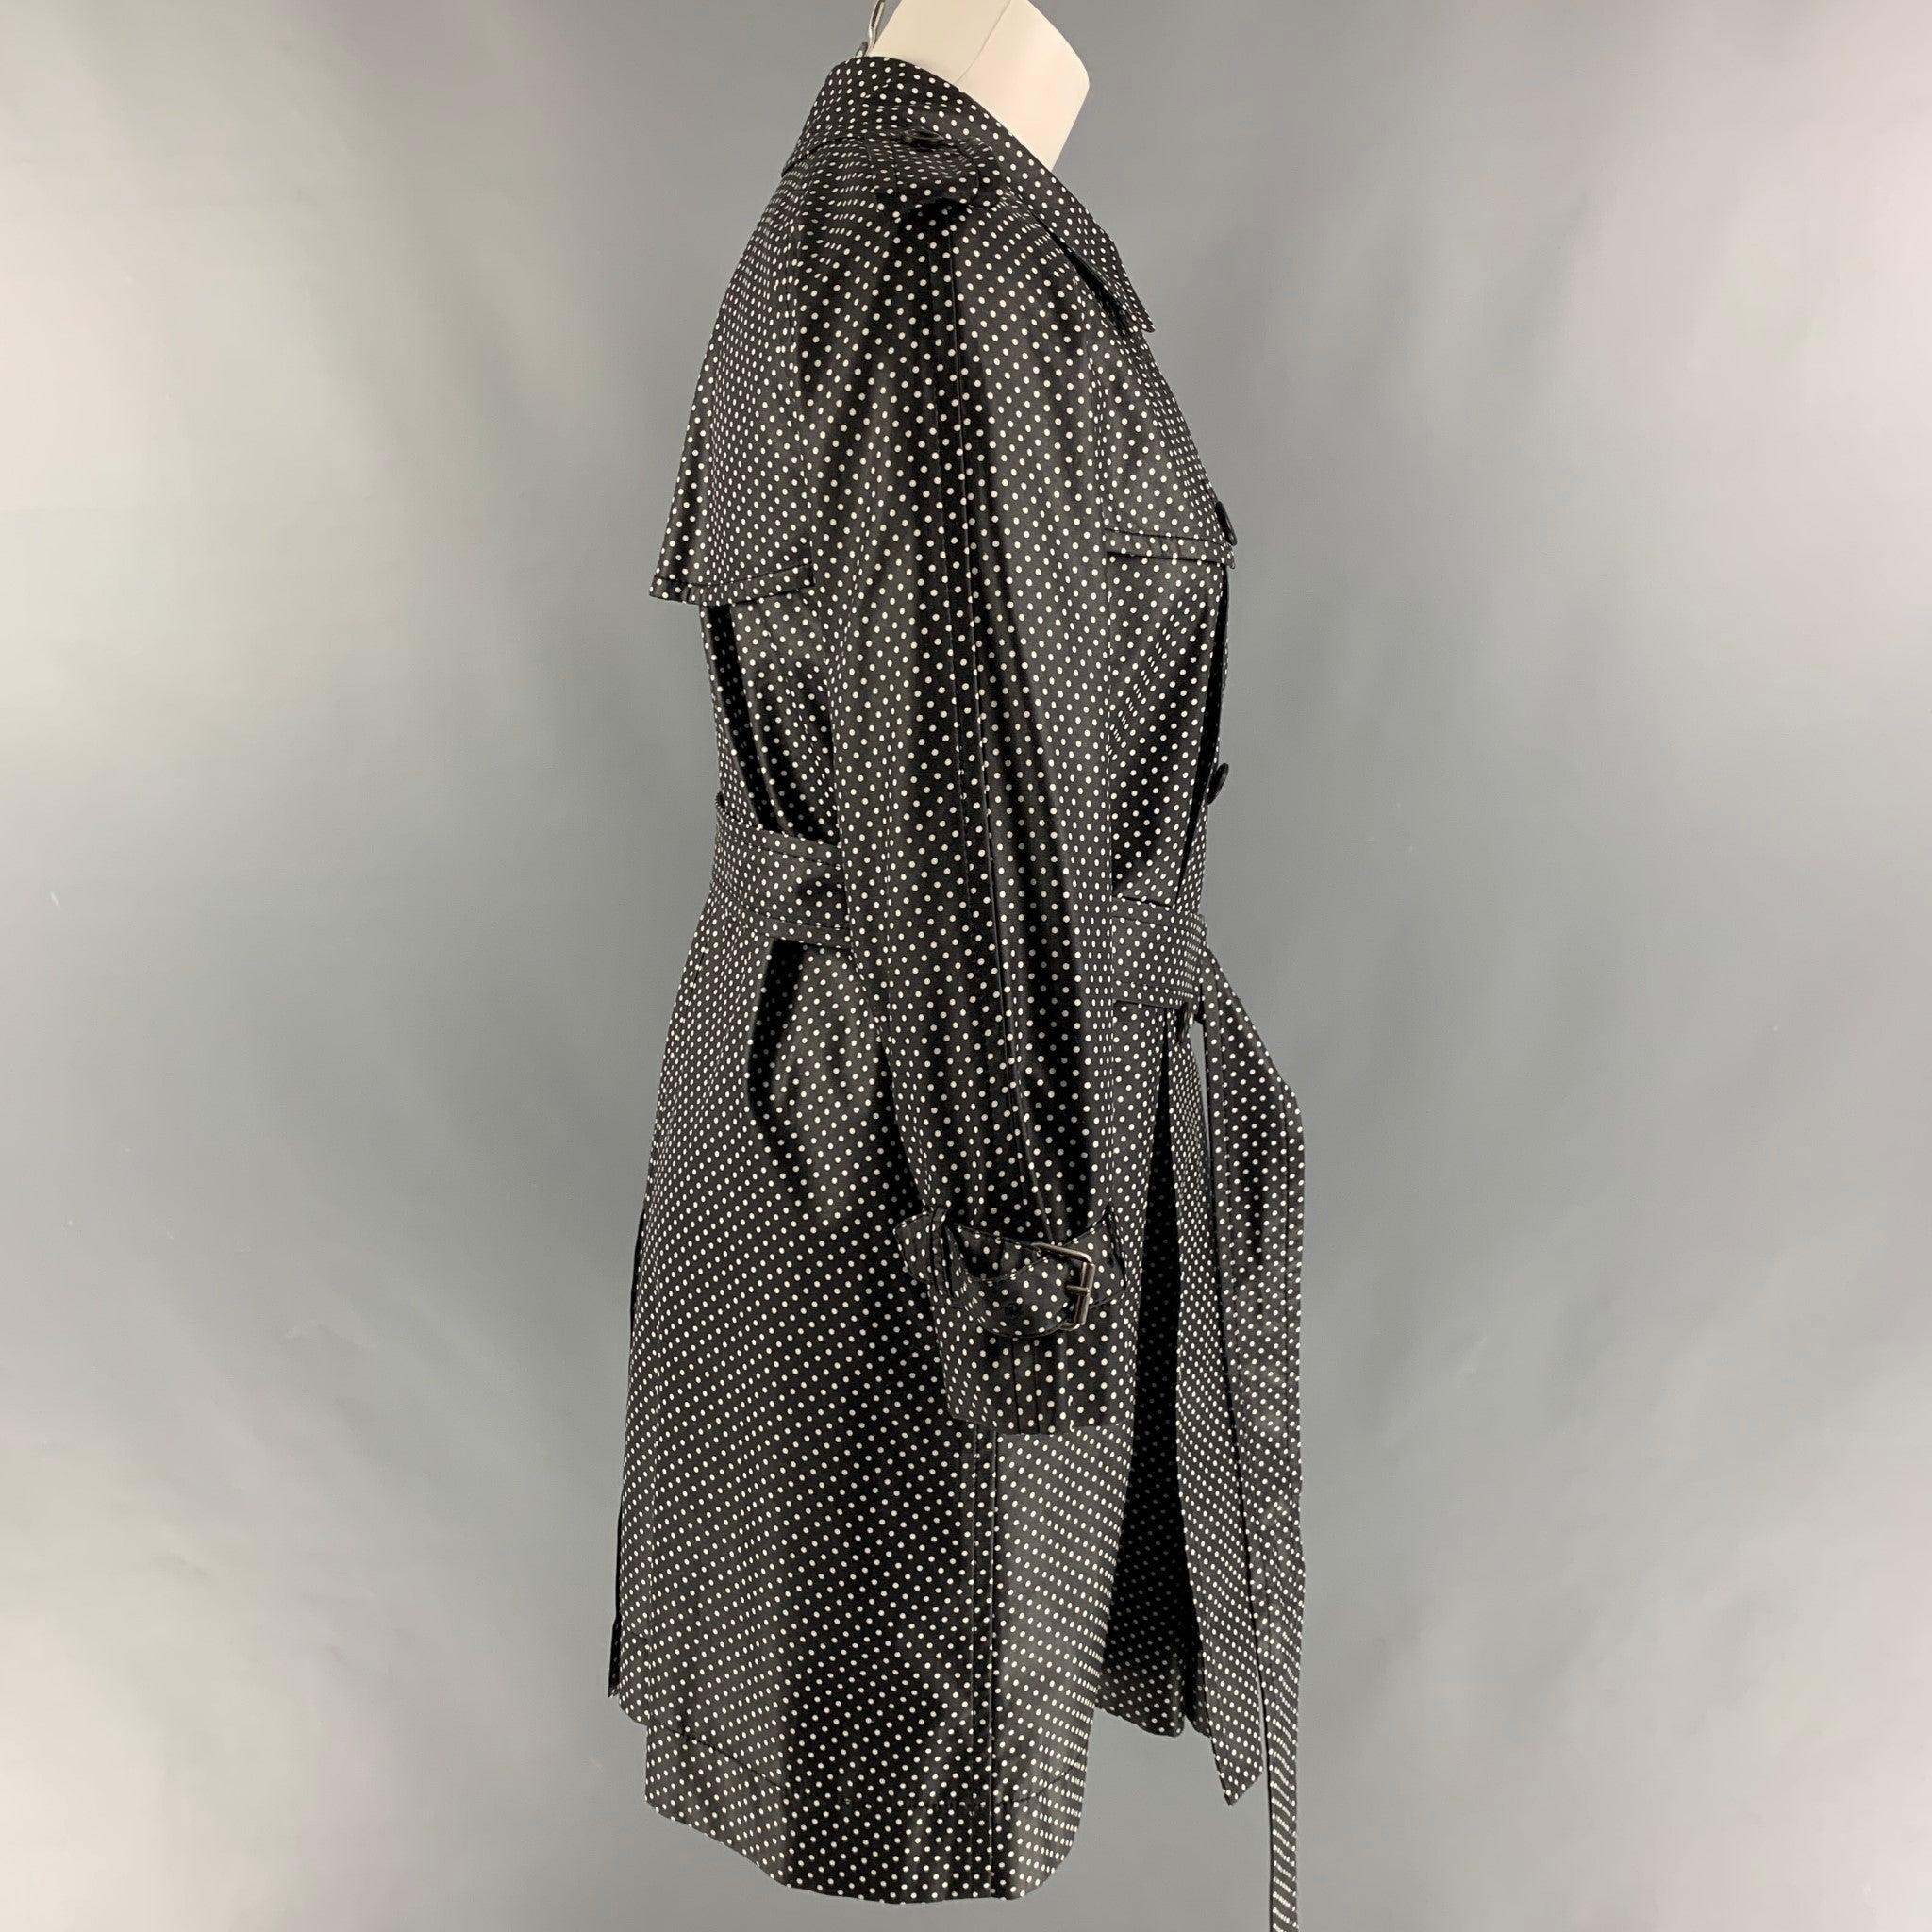 MARC JACOBS trench coat comes in a black and white polka dot silk fabric with a full liner featuring a belted style, single back vent, epaulettes, hook & eye closure at collar, front pockets, and a double breasted closure. Made in USA.Excellent